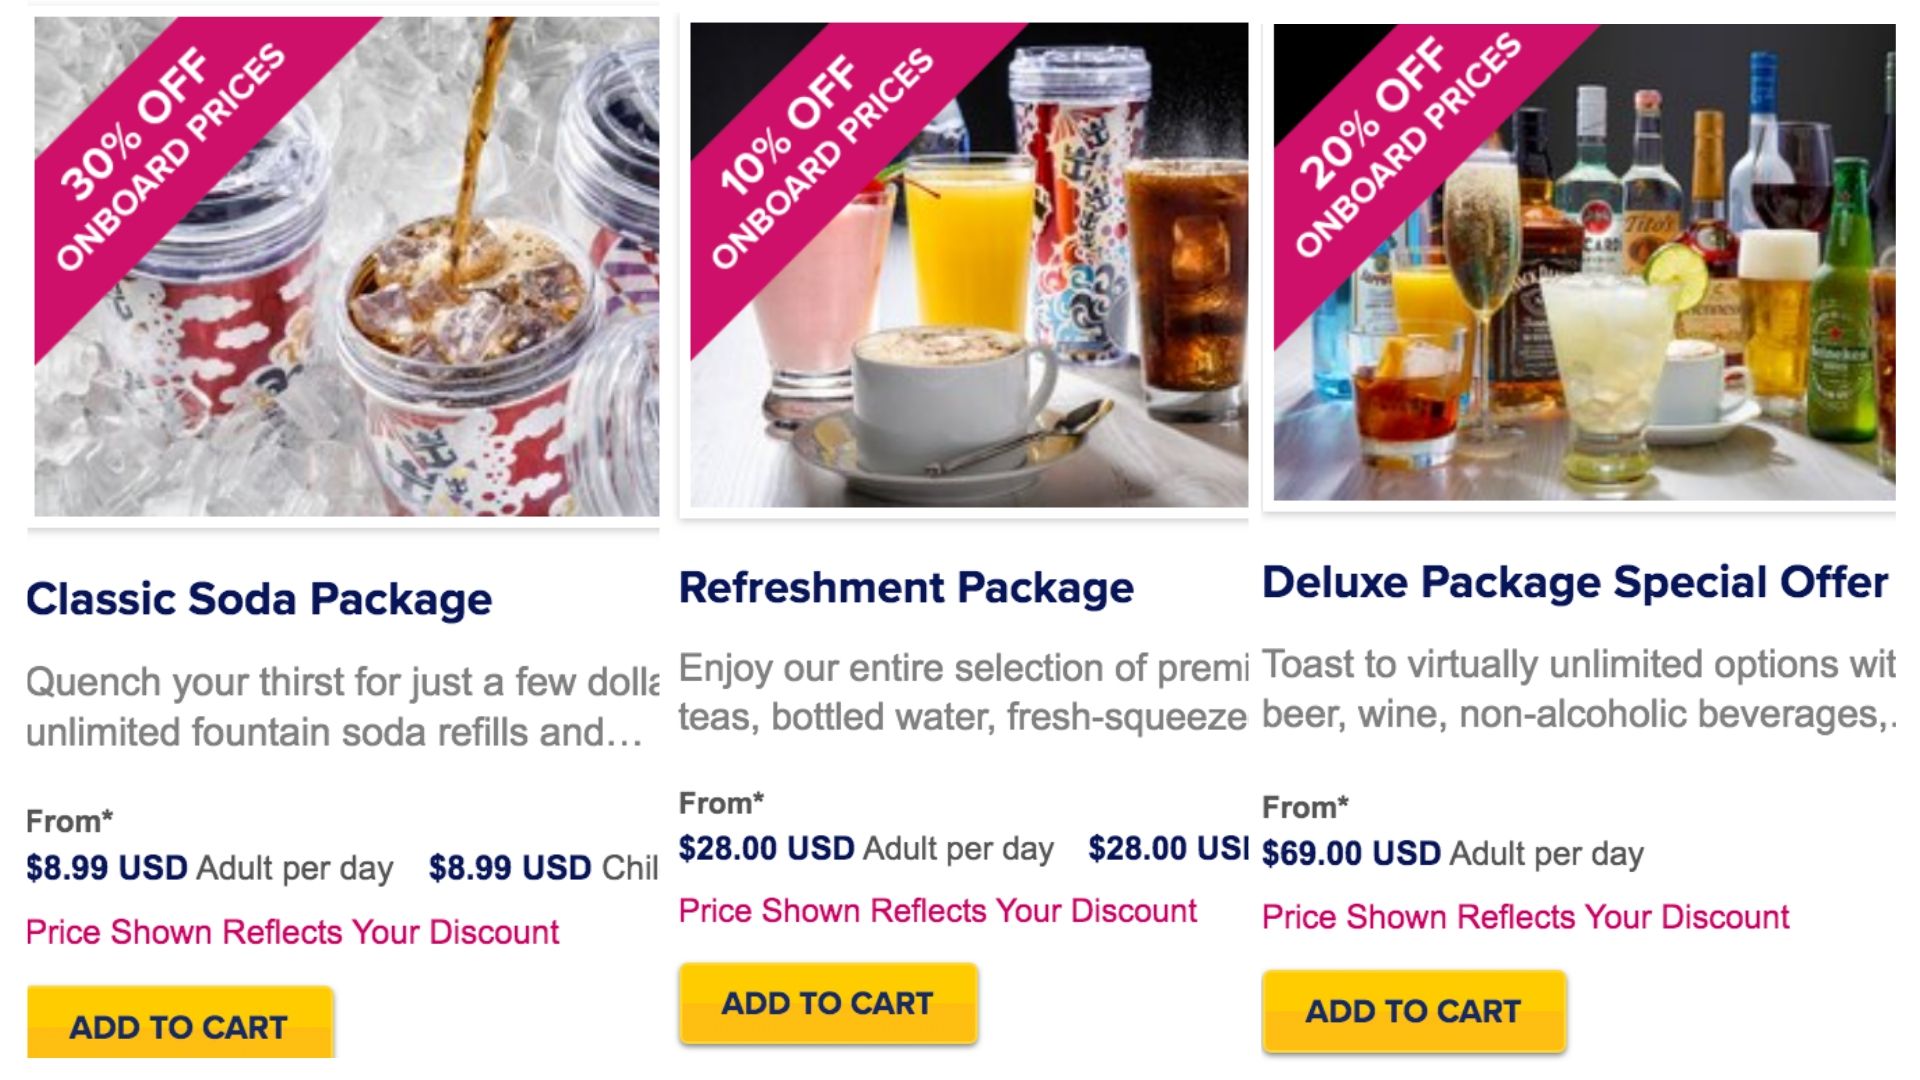 Royal Caribbean Cruise Line Beverage Packages Explained Me and the Mouse Travel